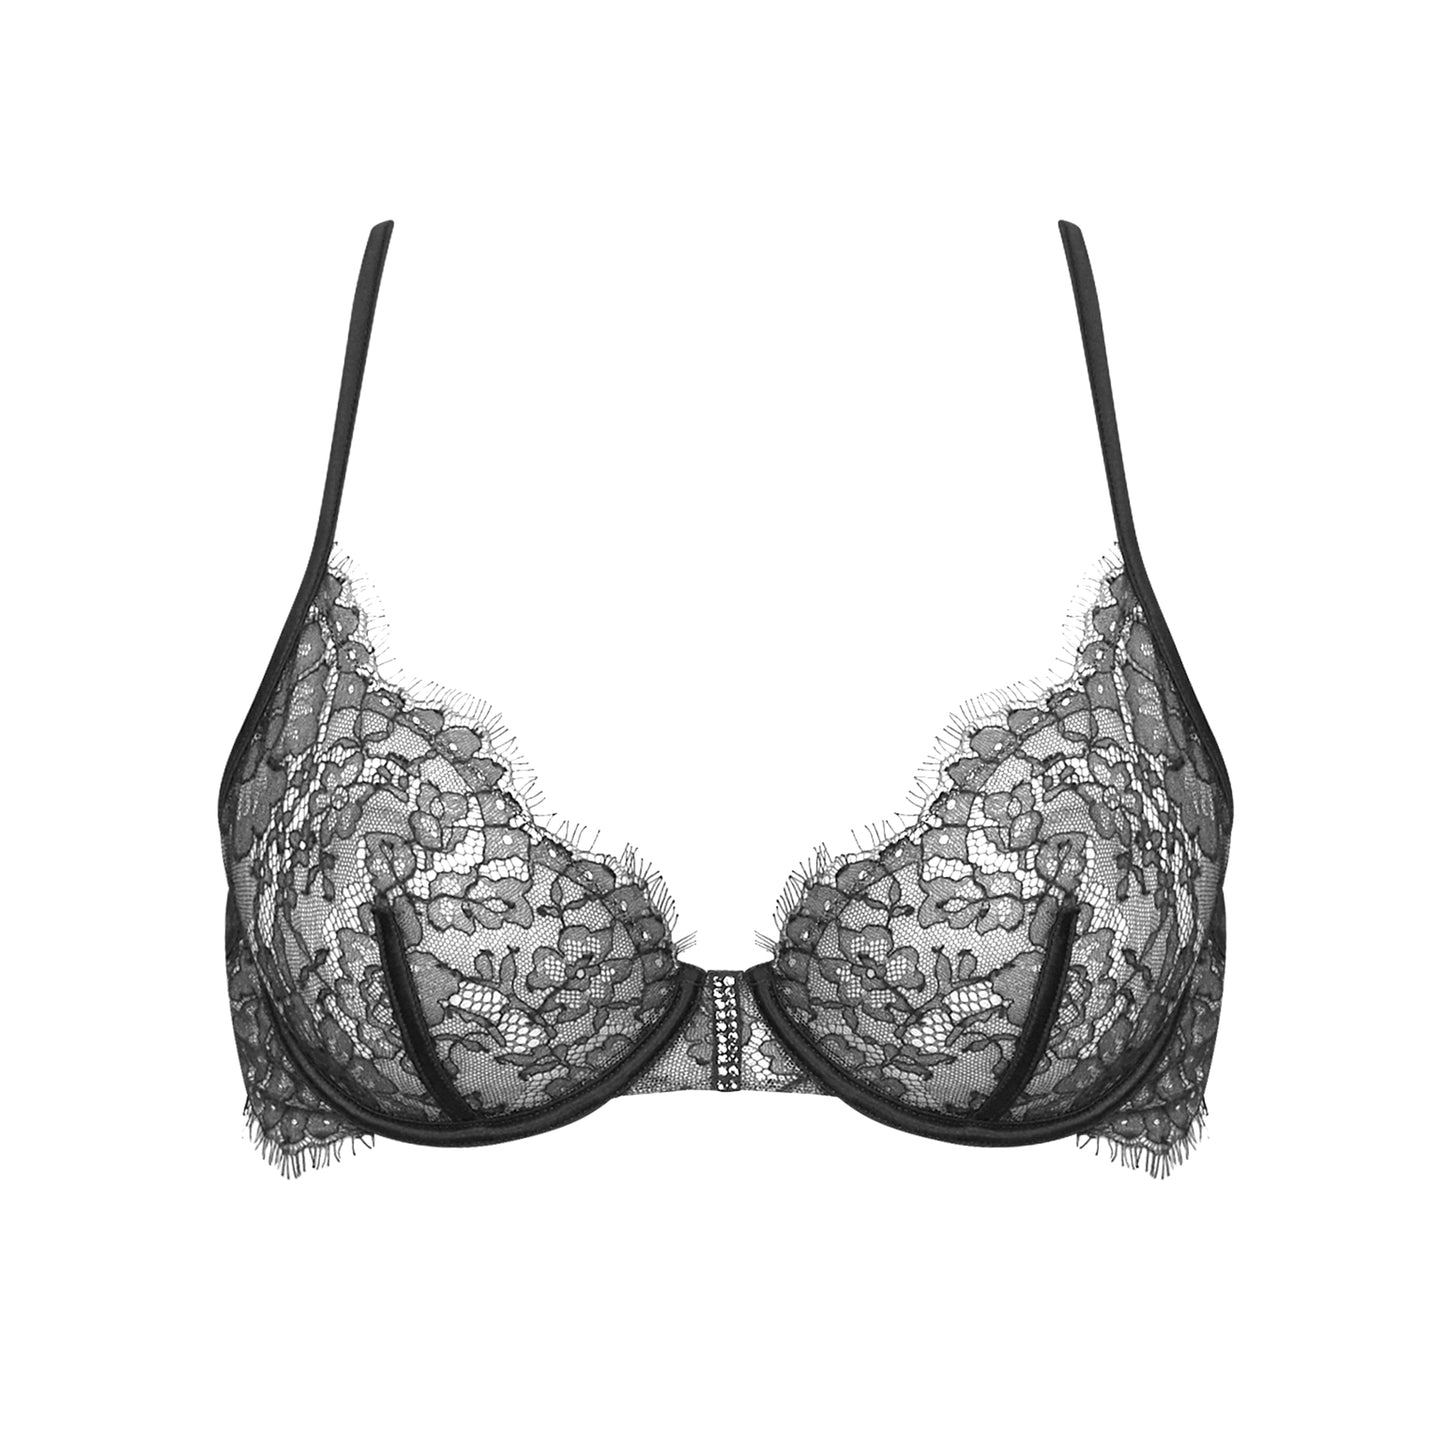 Andres Sarda Relang volle cup bh zwart